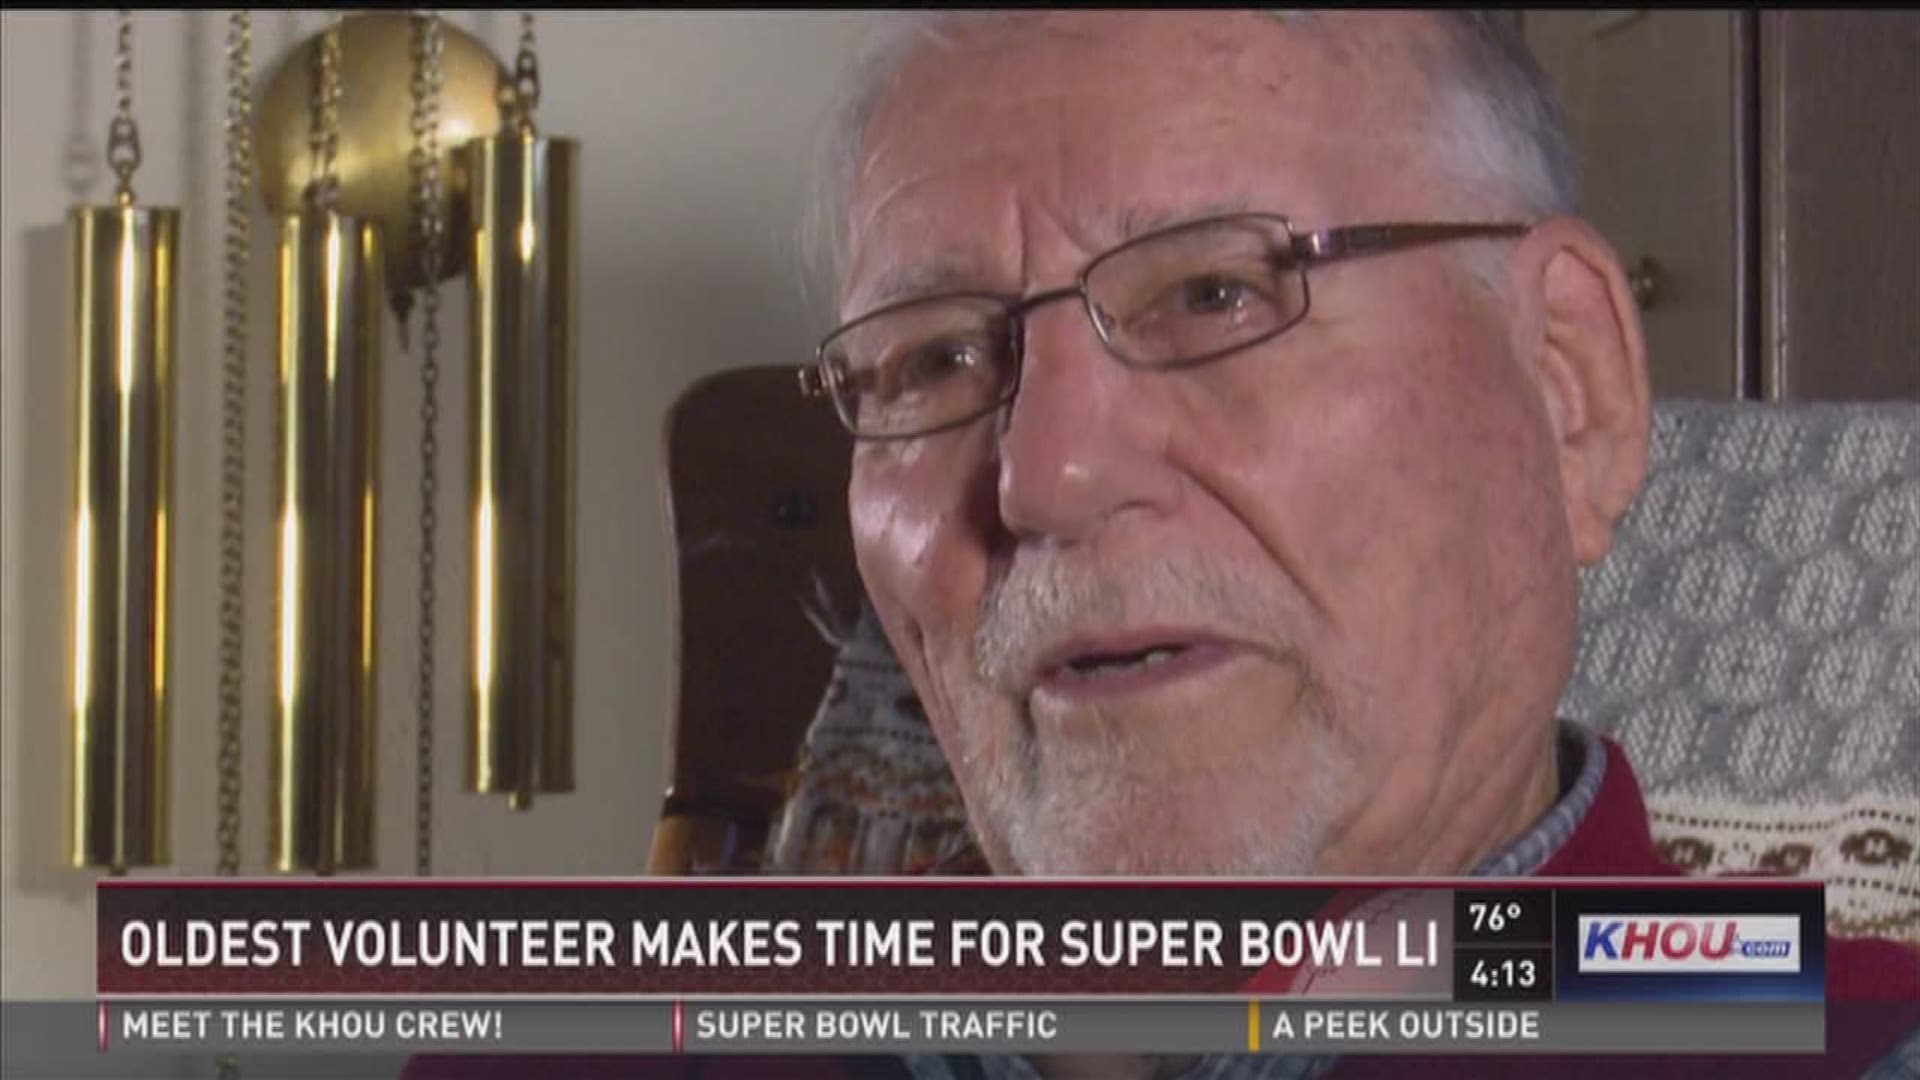 More than 31,000 people applied to become Super Bowl volunteers but only 10,000 were selected. At 85, John Dansdill is the oldest volunteer. 